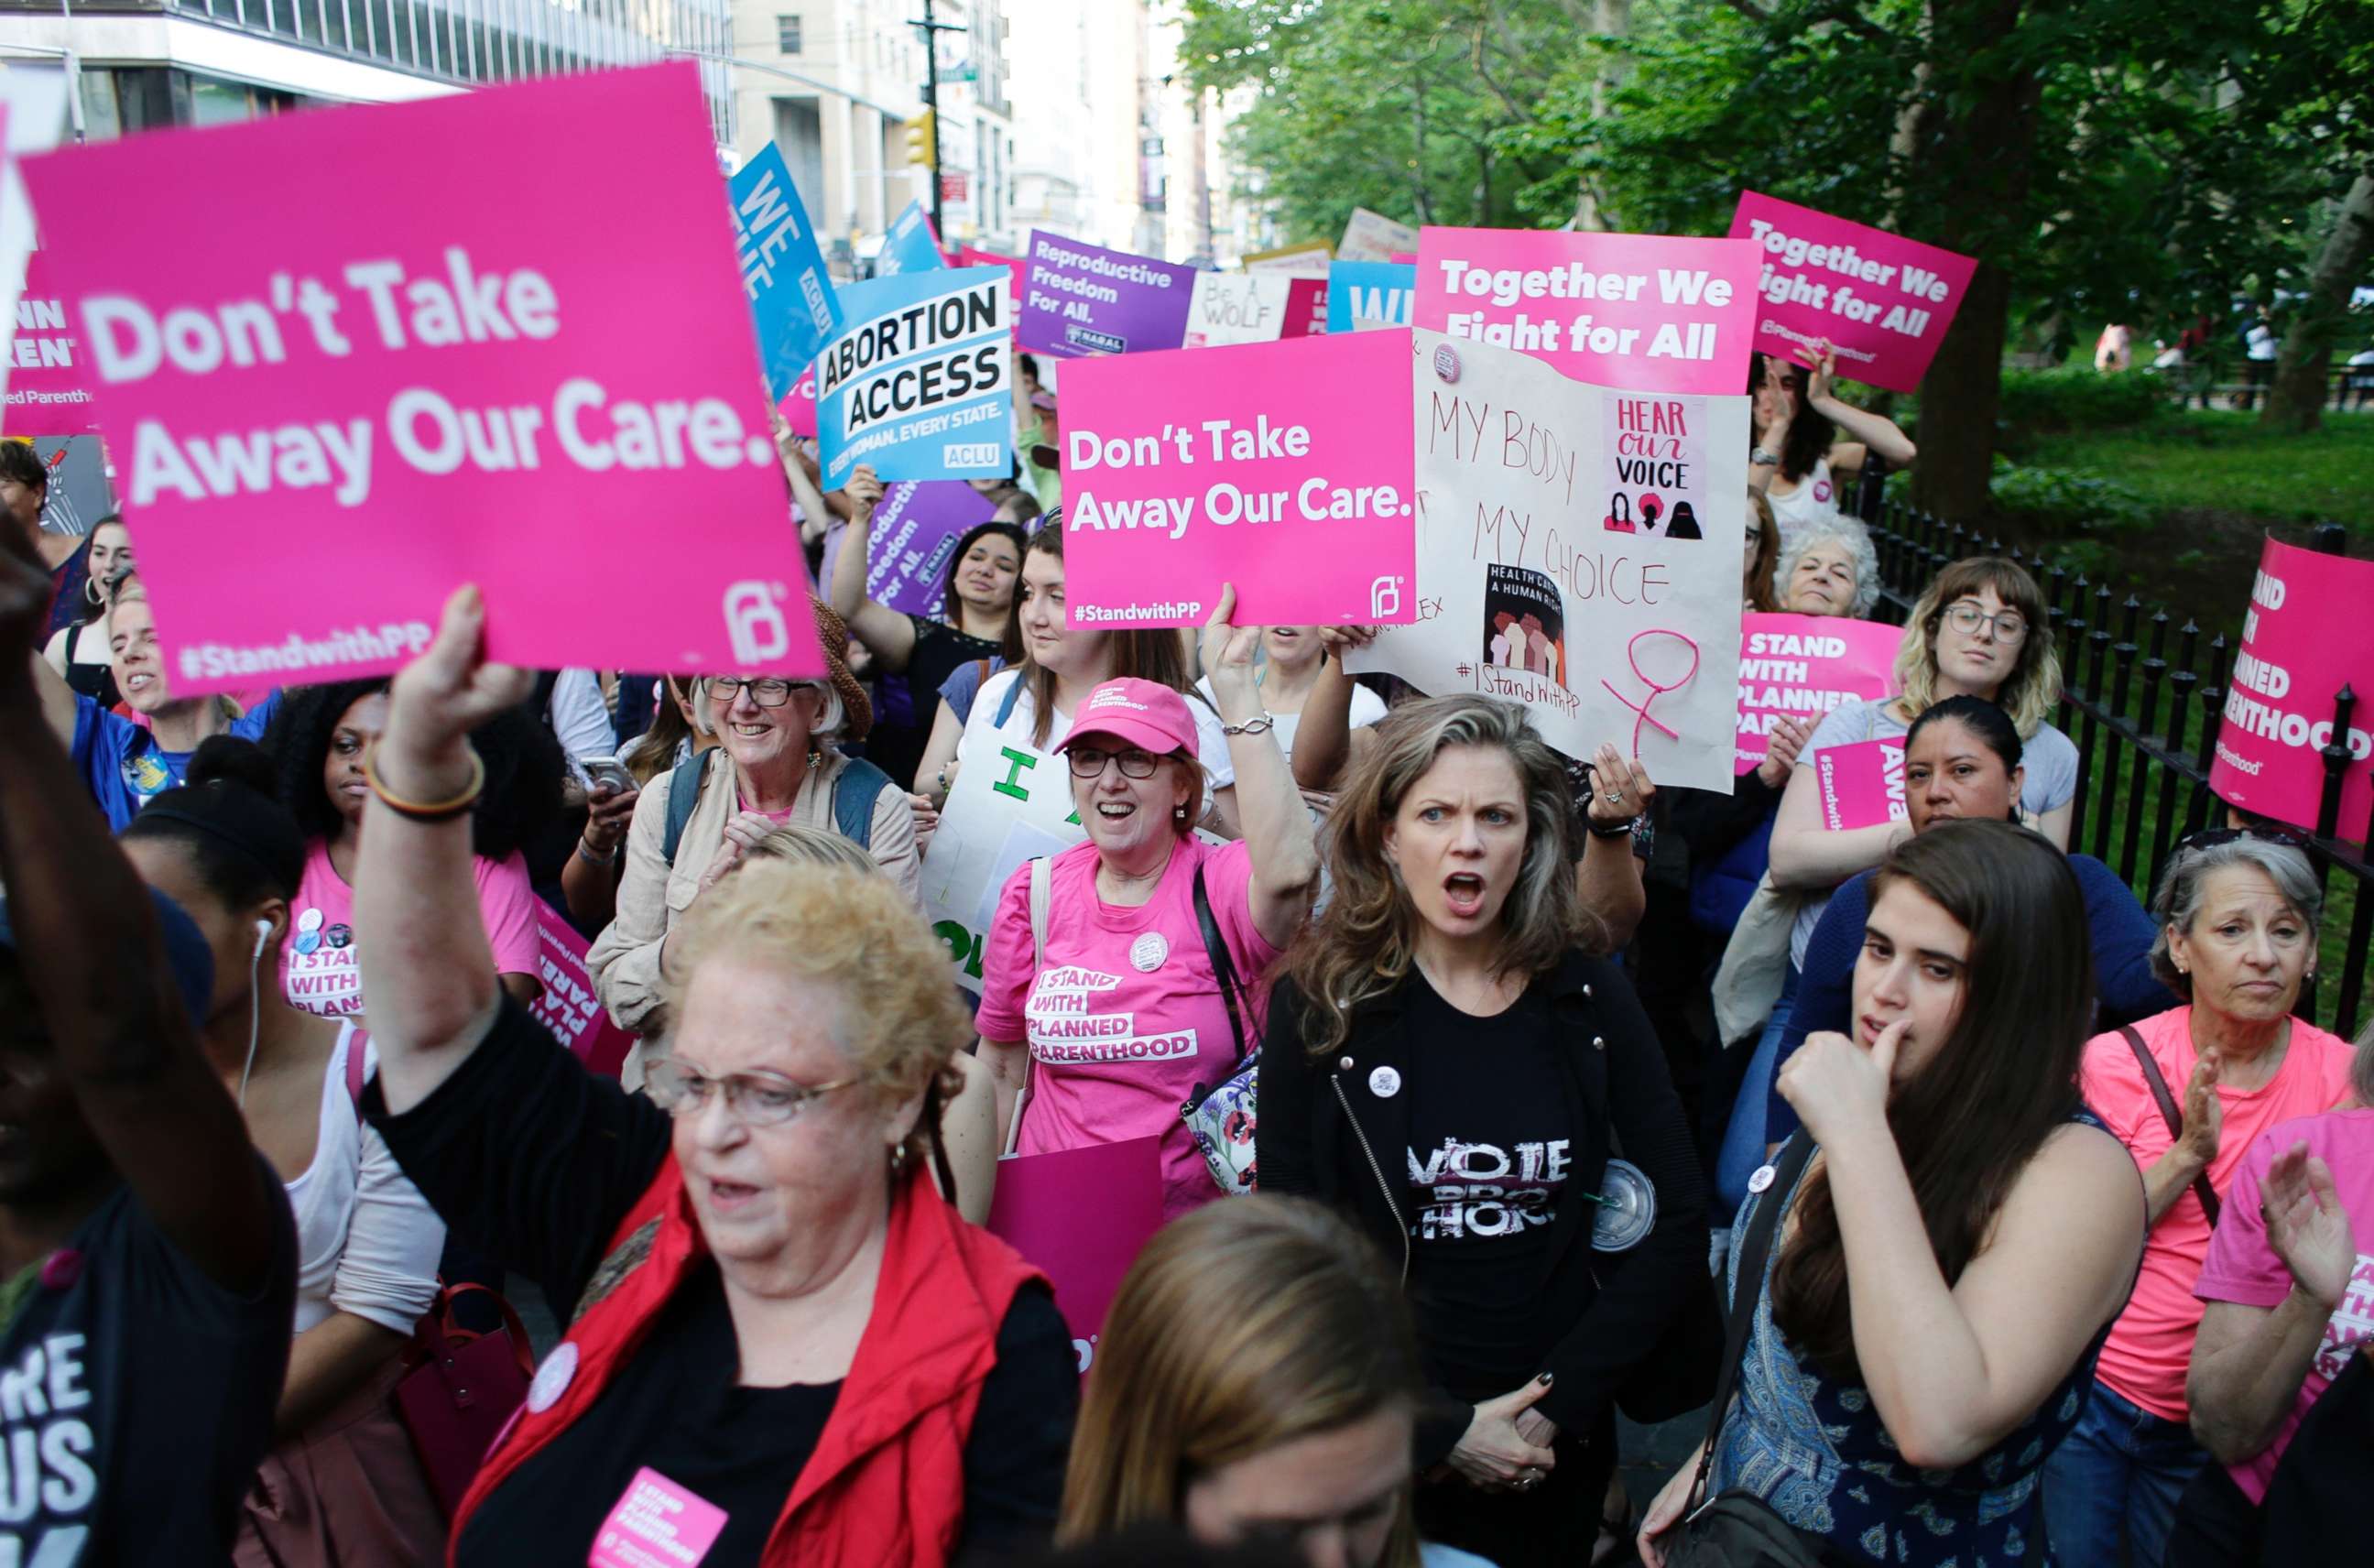 PHOTO: Supporters of Planned Parenthood react to speakers at a rally, May 24, 2018, in New York.